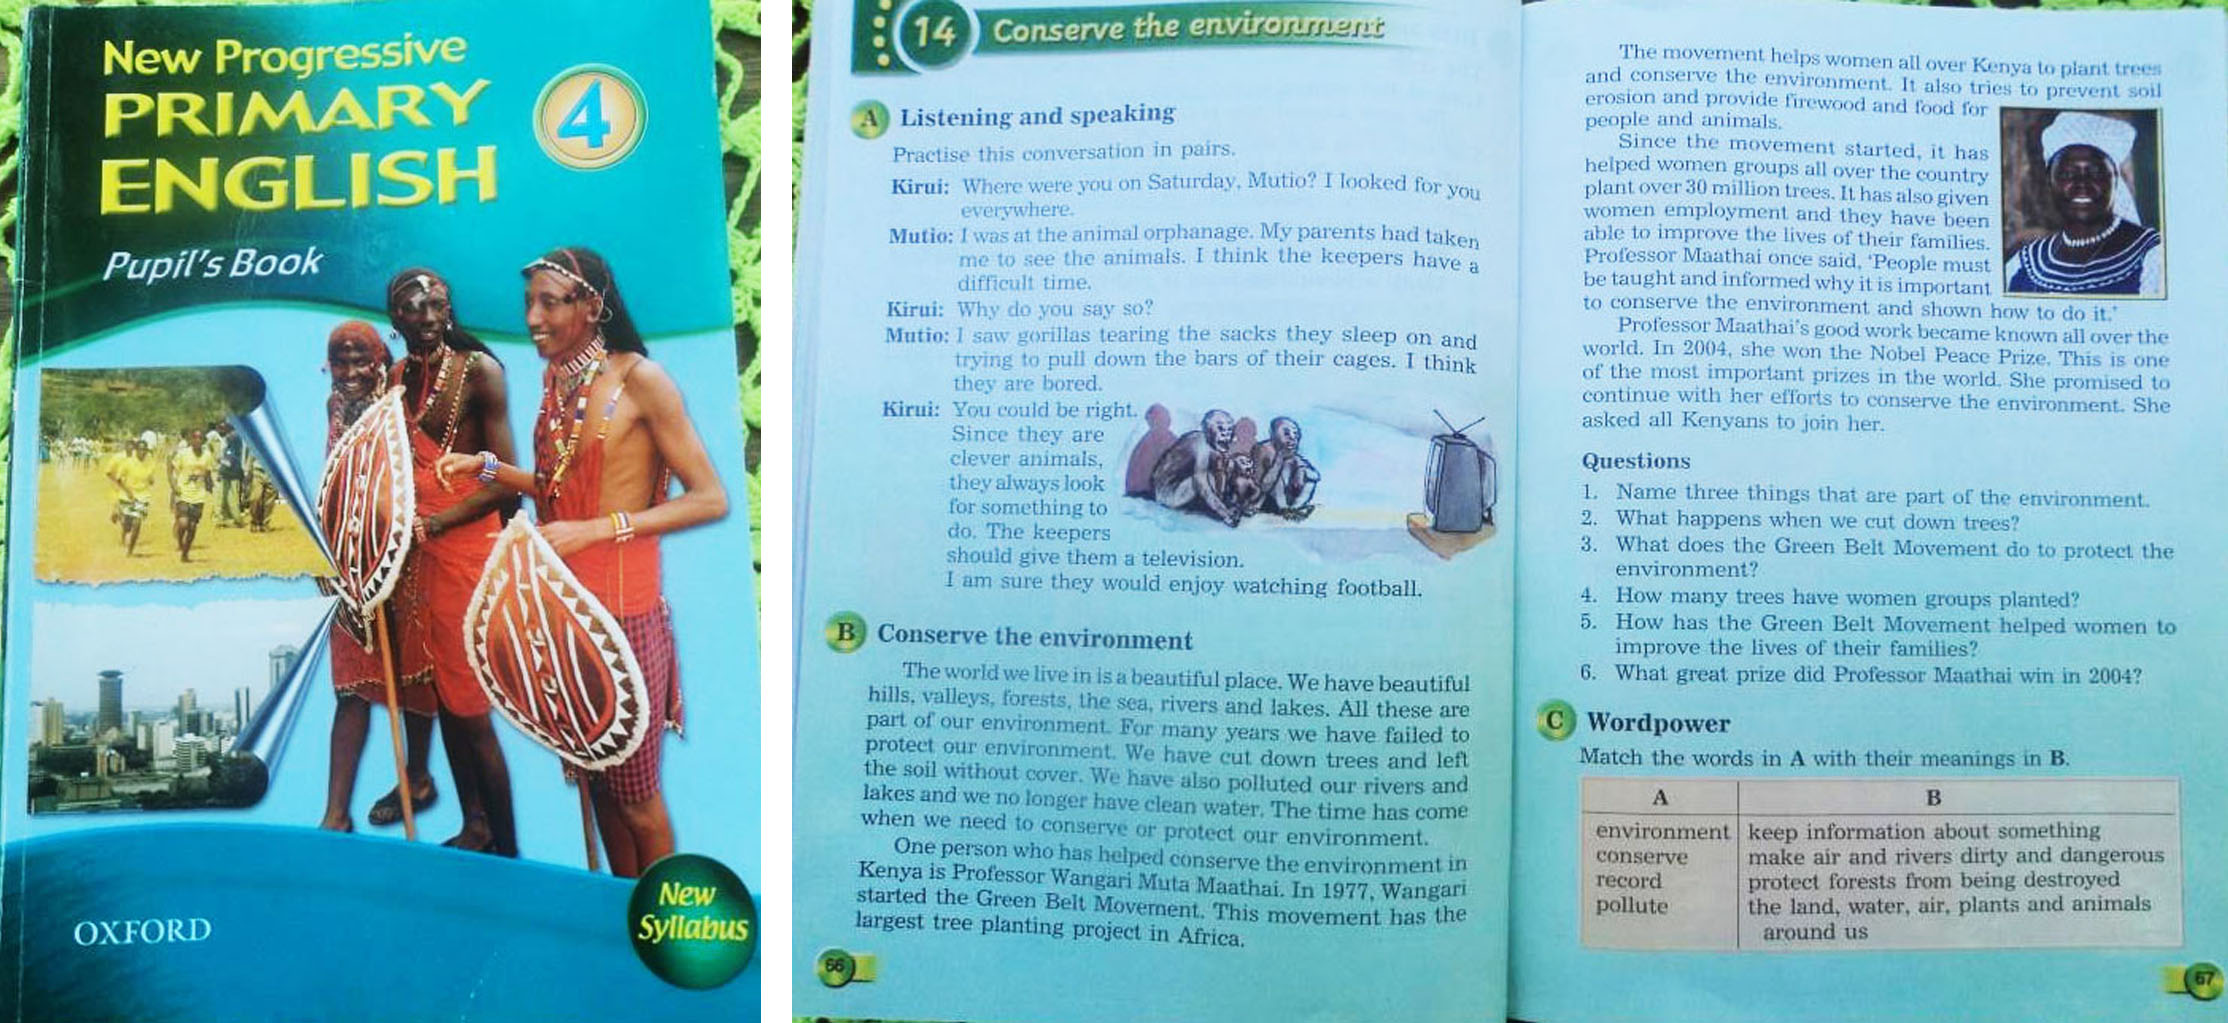 Left: The School Text book from which pupils learn about Environmental Conservation, Right: inside the book where the notes and assignment was drawn from.